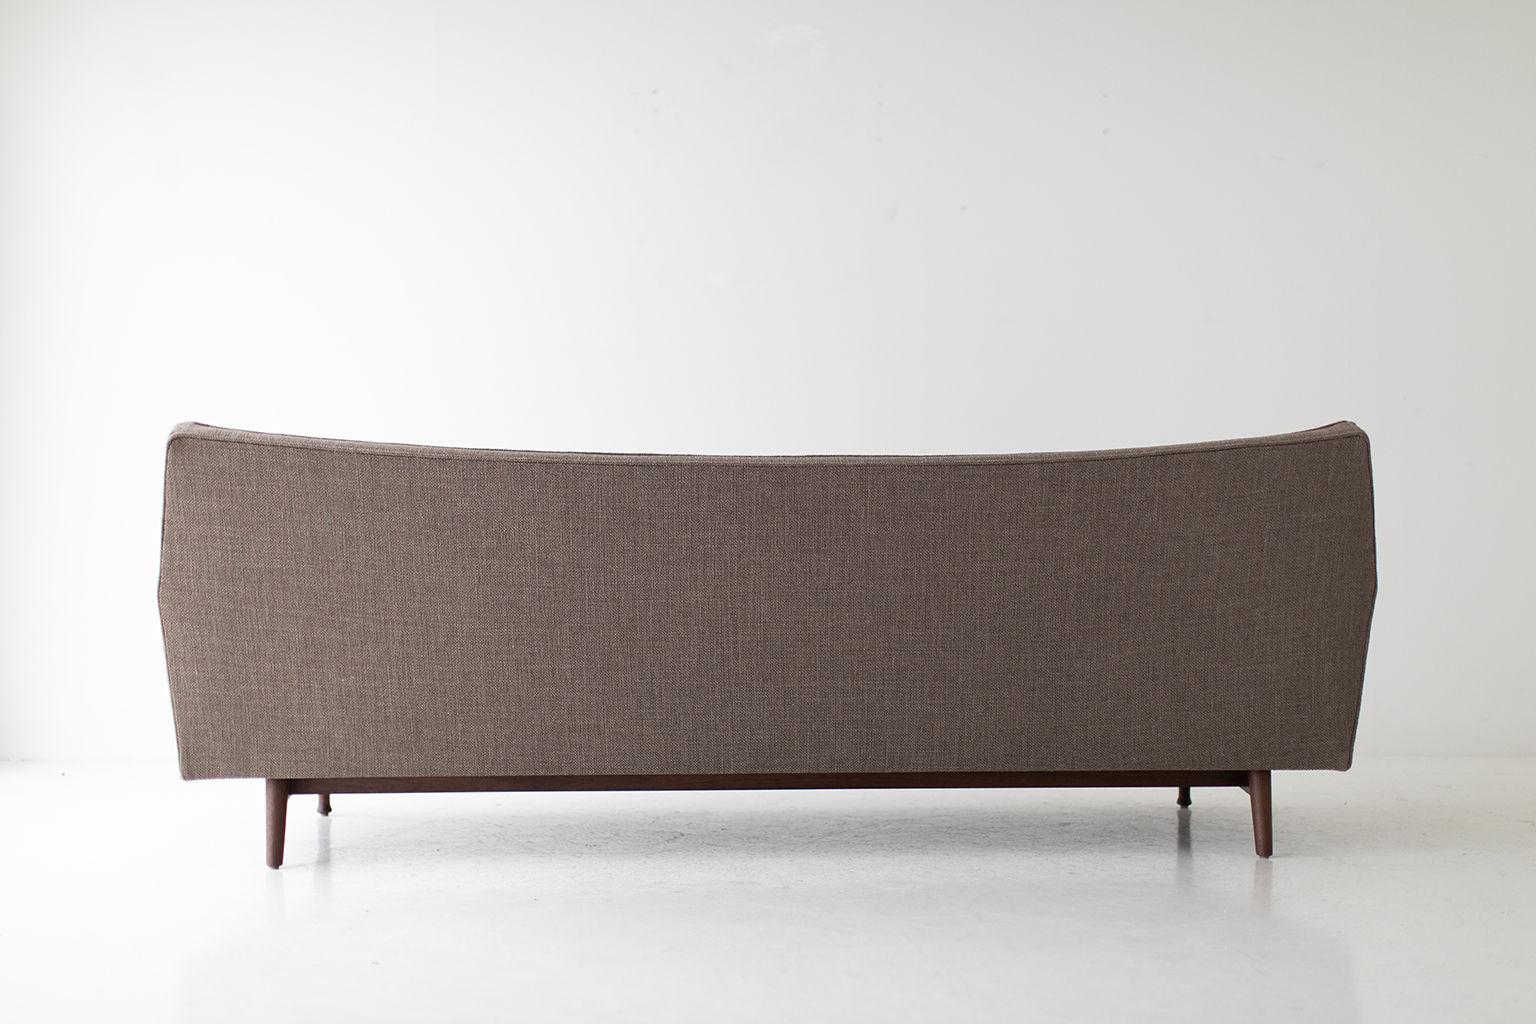 Fabric Lawrence Peabody Modern Sofa for Craft Associates Furniture For Sale